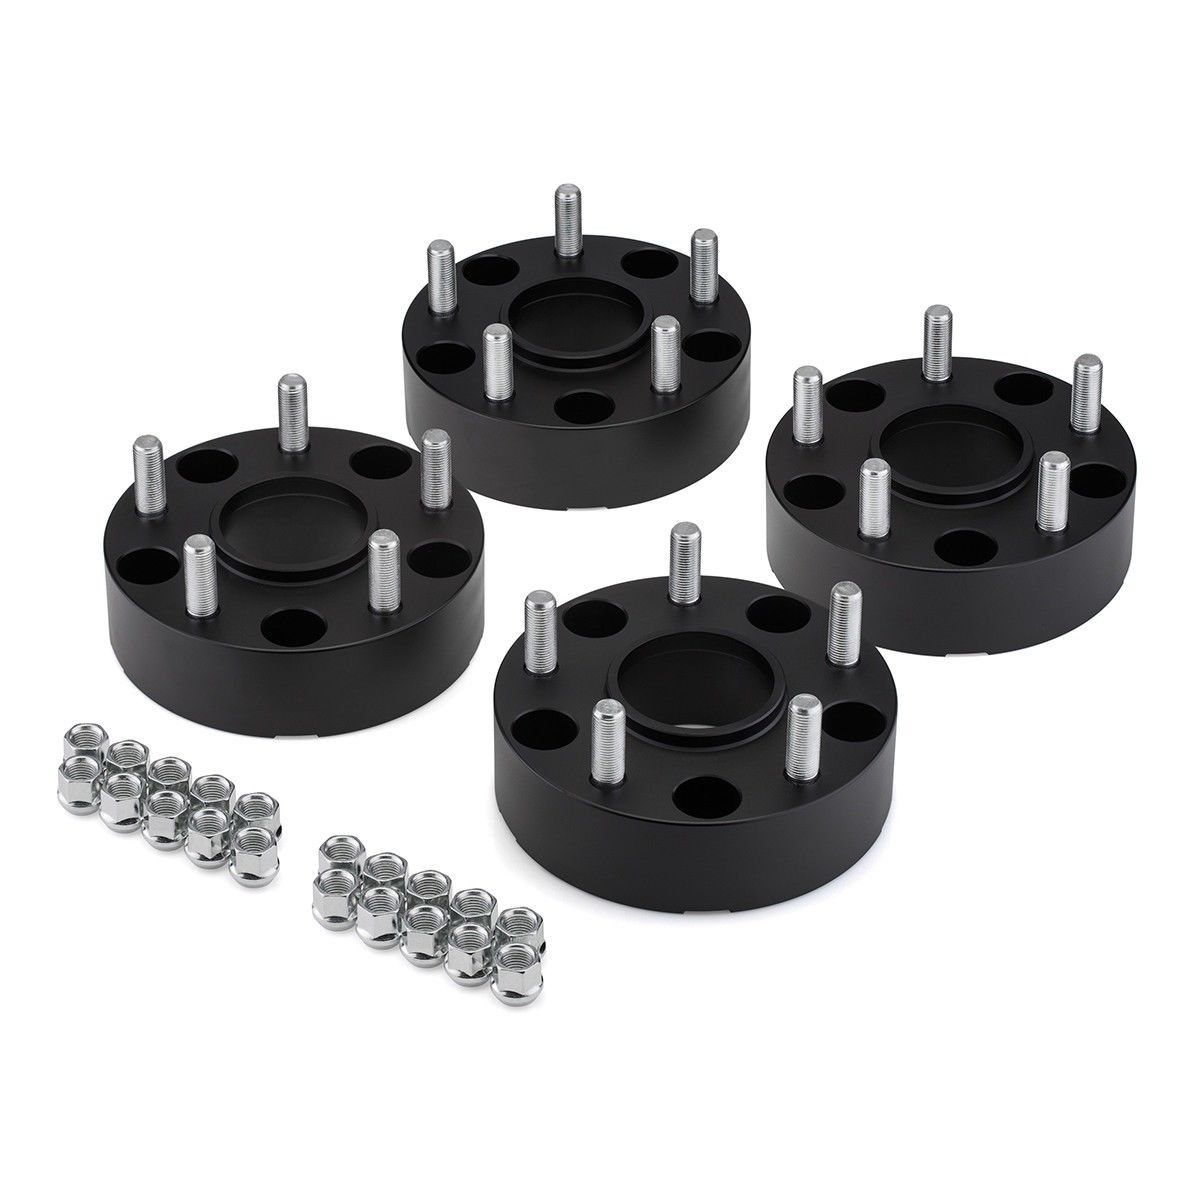 FITS 1995-2014 NISSAN MAXIMA Hub-Centric Wheel Spacers Kit (4pc)